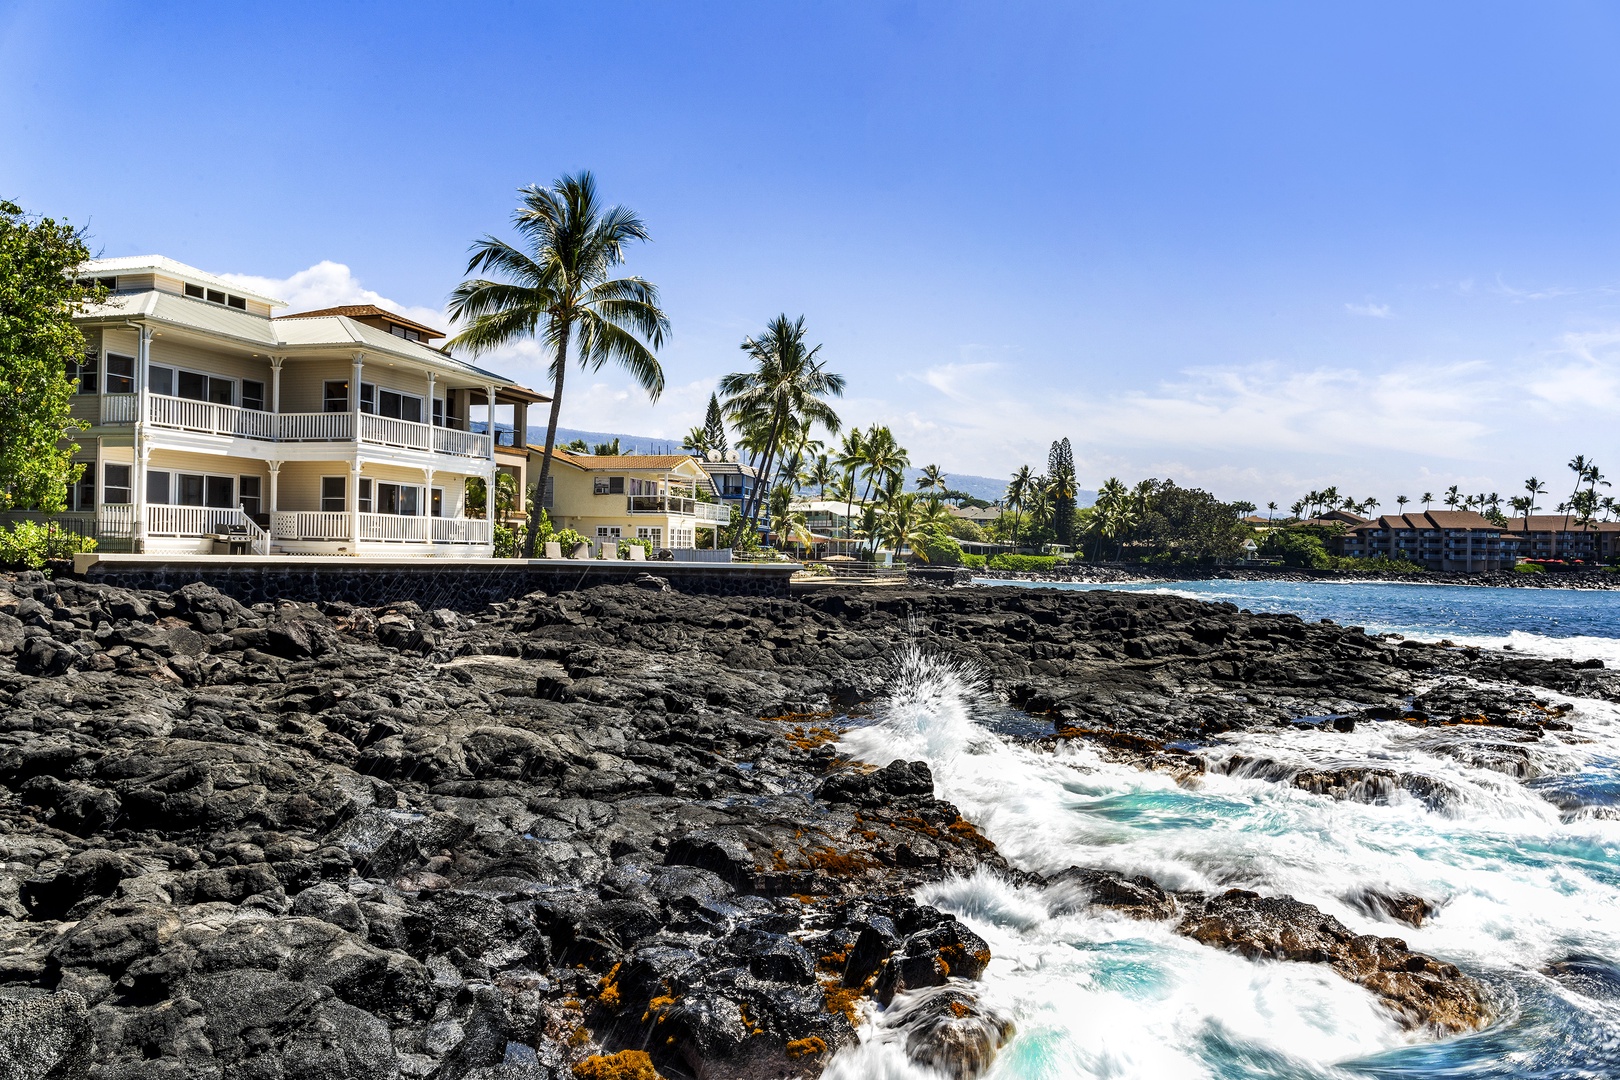 Kailua Kona Vacation Rentals, Dolphin Manor - This home is a short walk to Kona town with a wealth of choices of shopping and restaurants.